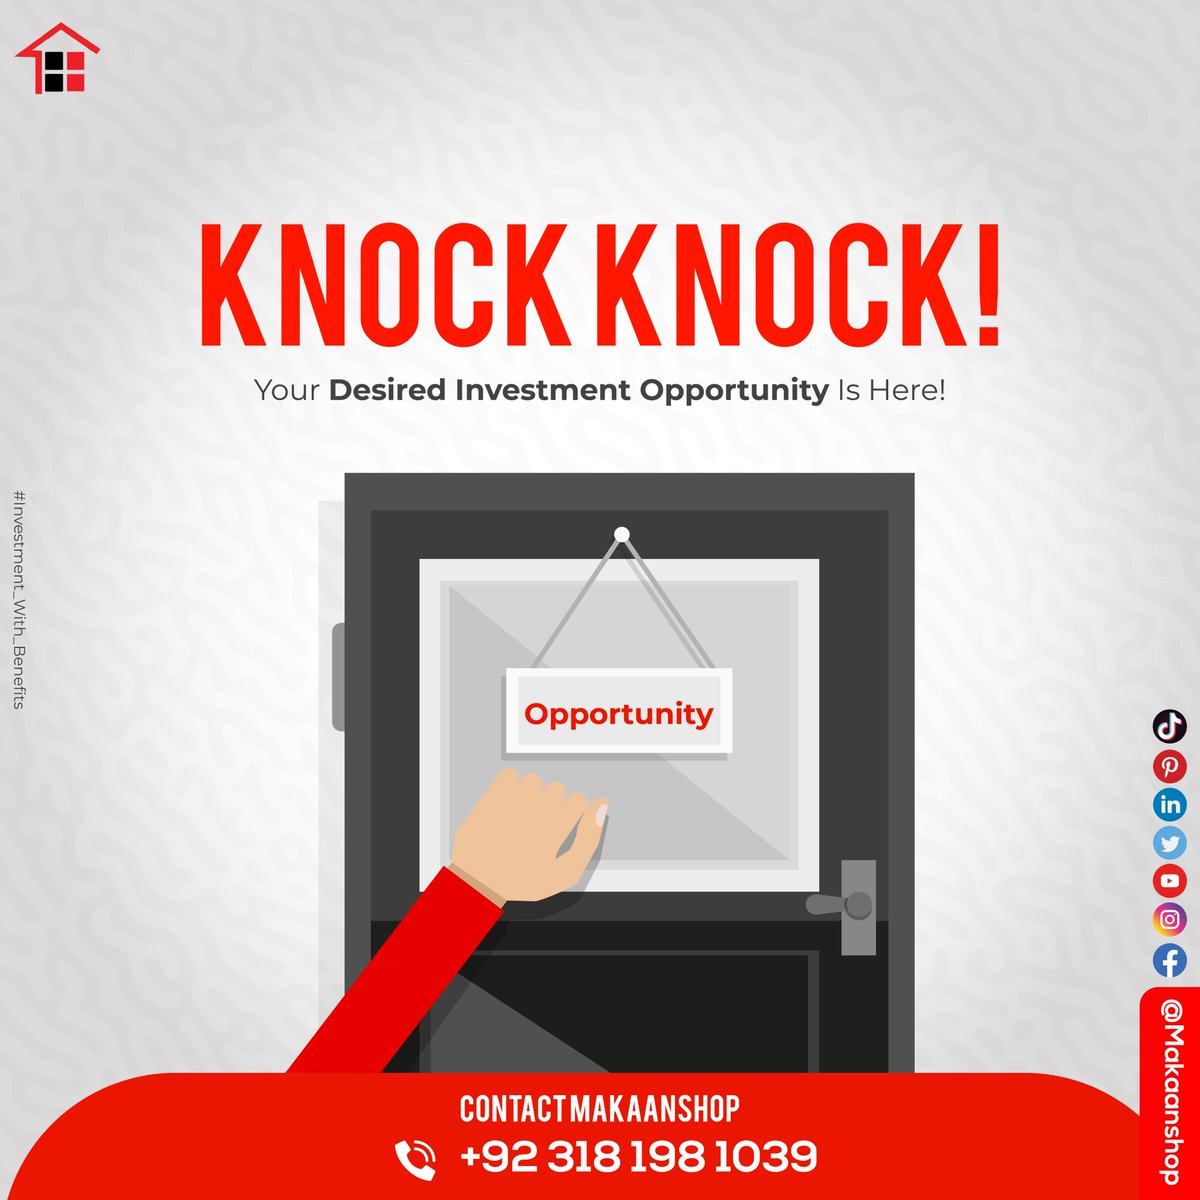 Makaanshop helps to buy, sell, rent & invest. Get investment consultancy & investment opportunities. 
Follow to know more!
#Makaanshop #Propertyportal #InvestmentWithBenefits #buy #sell #rent #invest #realestateservices #investmentconsultancy #investmentopportunity #Pakistan